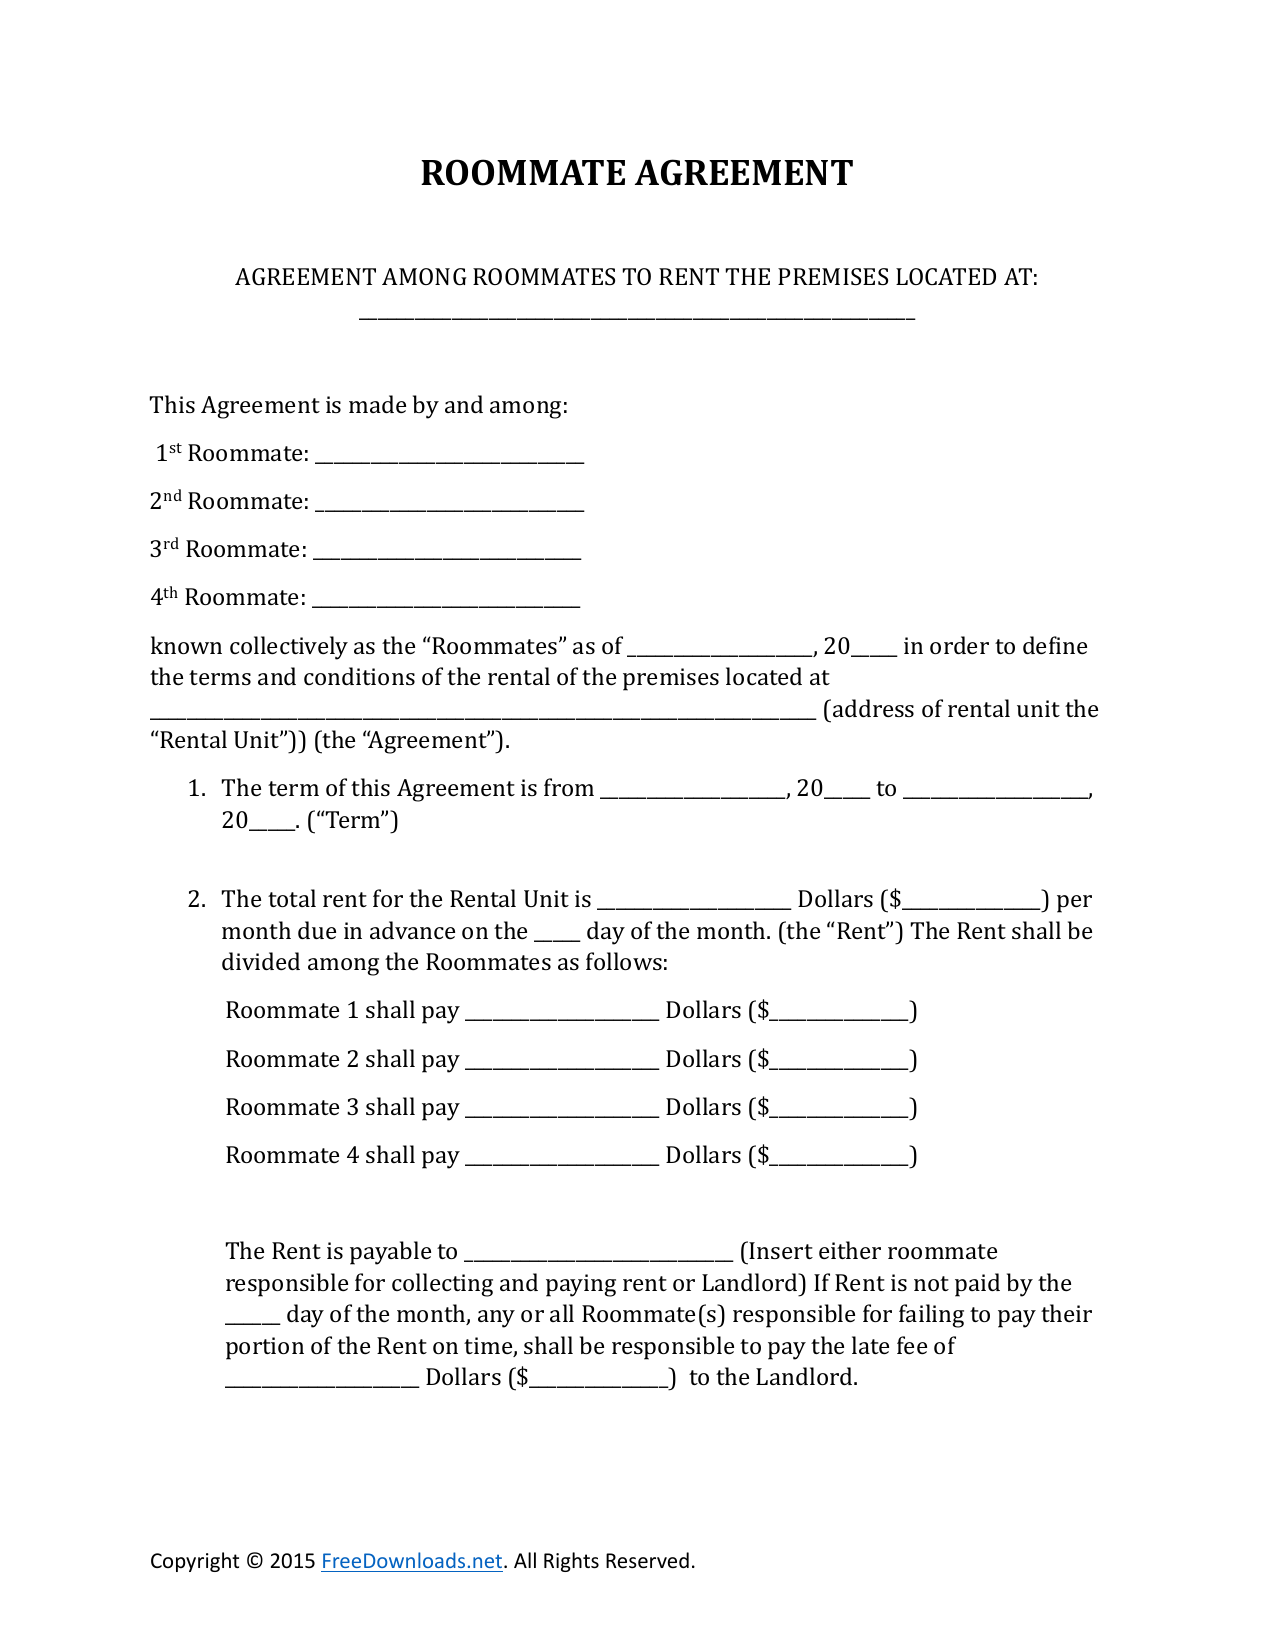 free-printable-lease-agreement-for-roommates-free-printable-templates